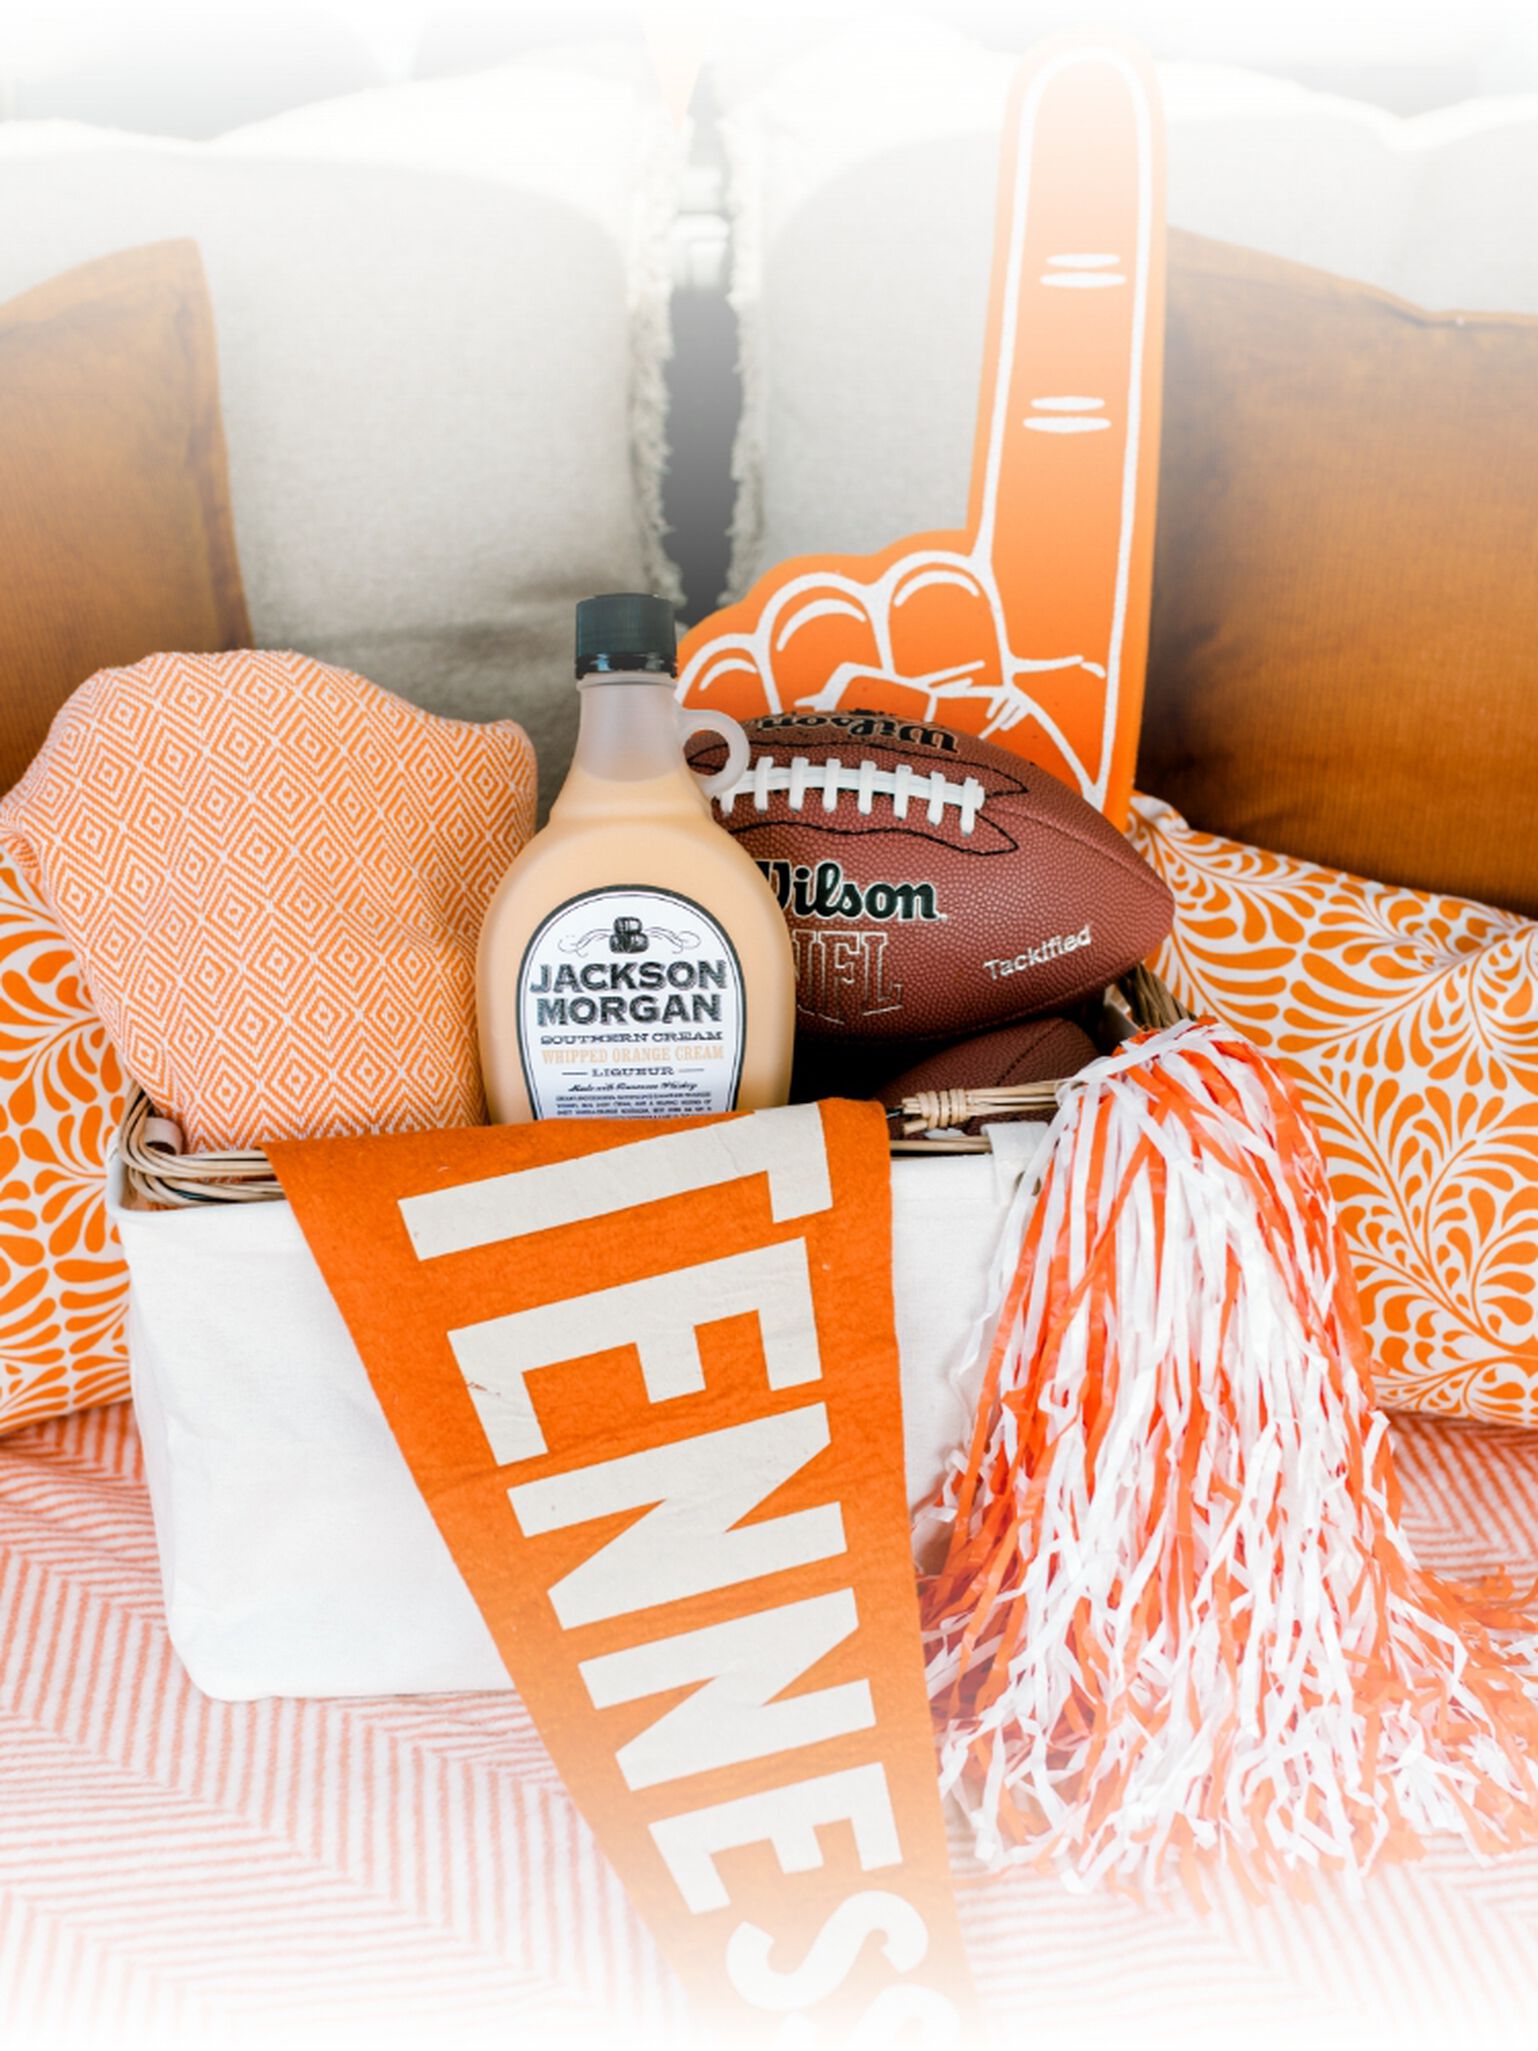 A bottle of Jackson Morgan Southern Cream with Tailgating Gear